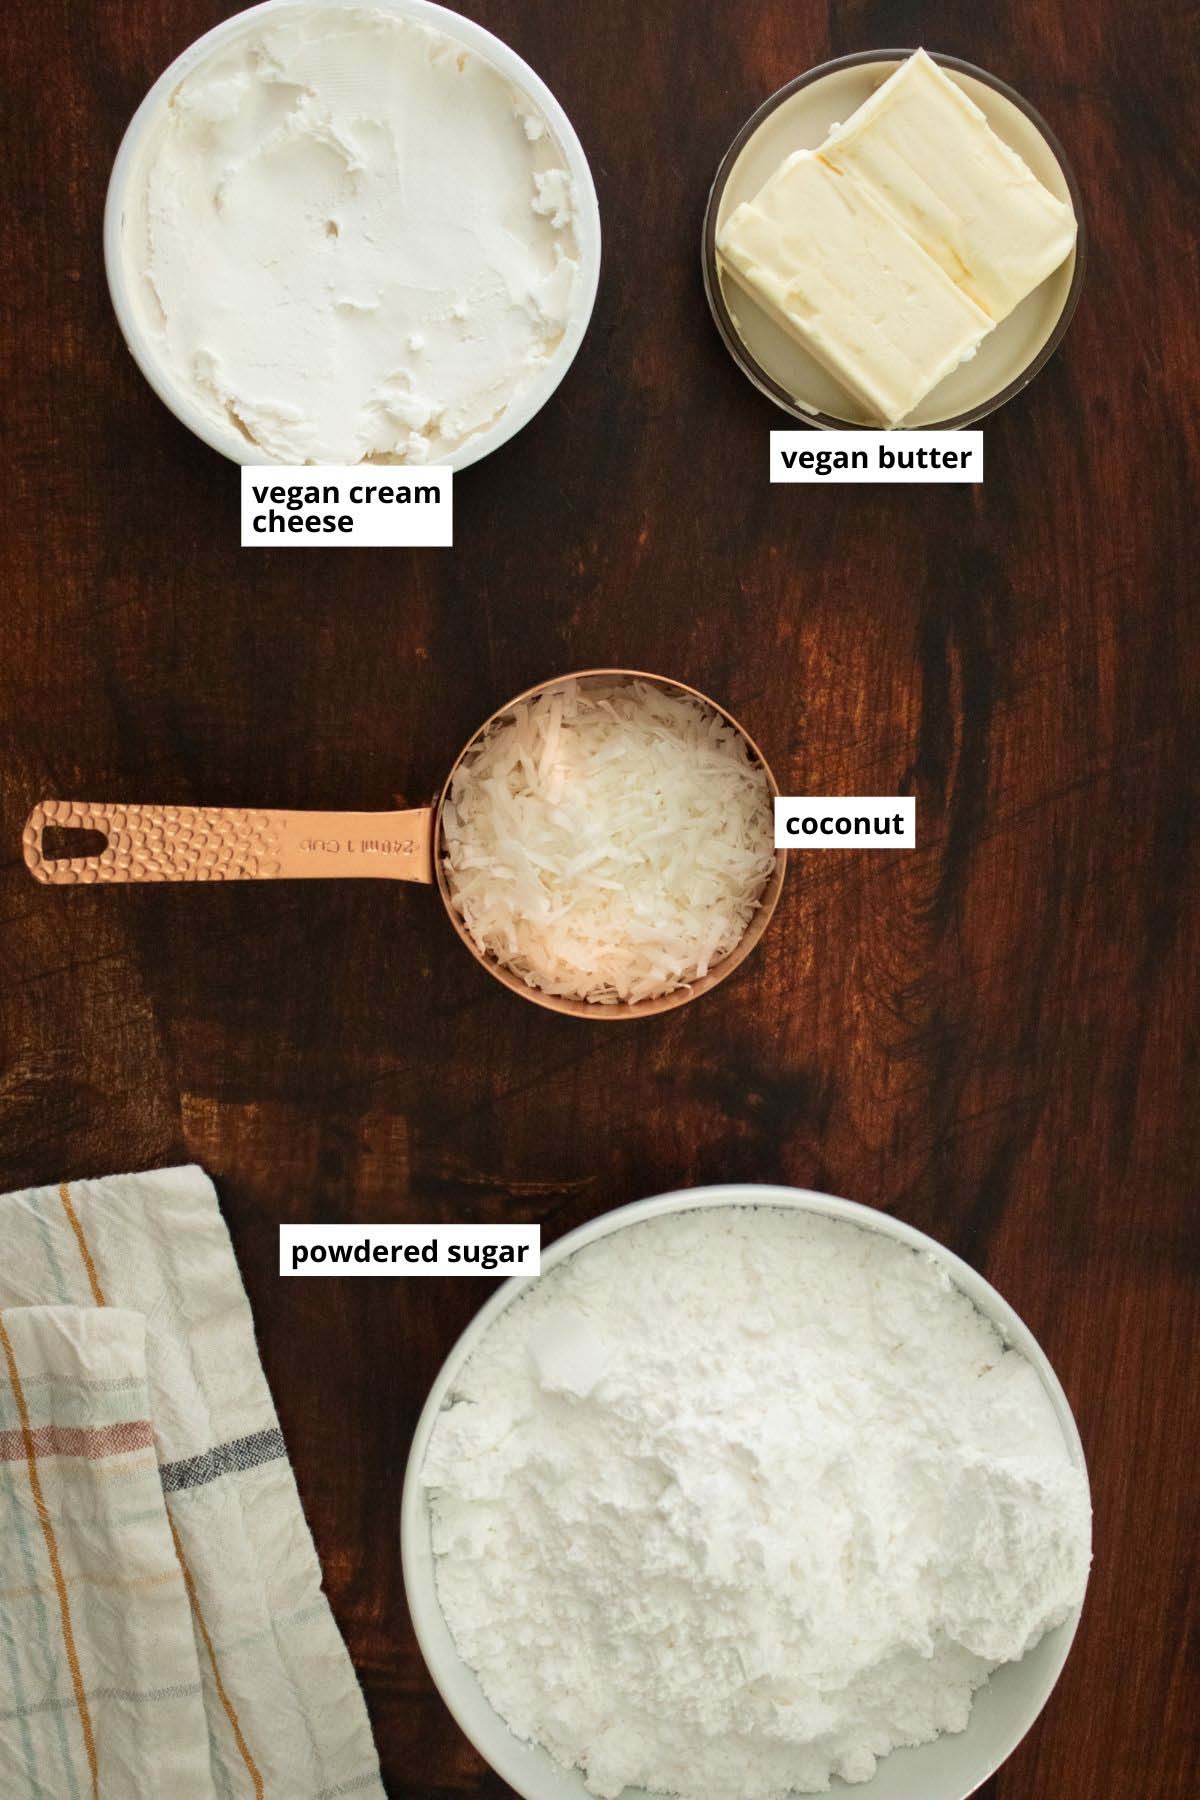 vegan cream cheese, coconut, and other frosting ingredients in cups on a wooden table